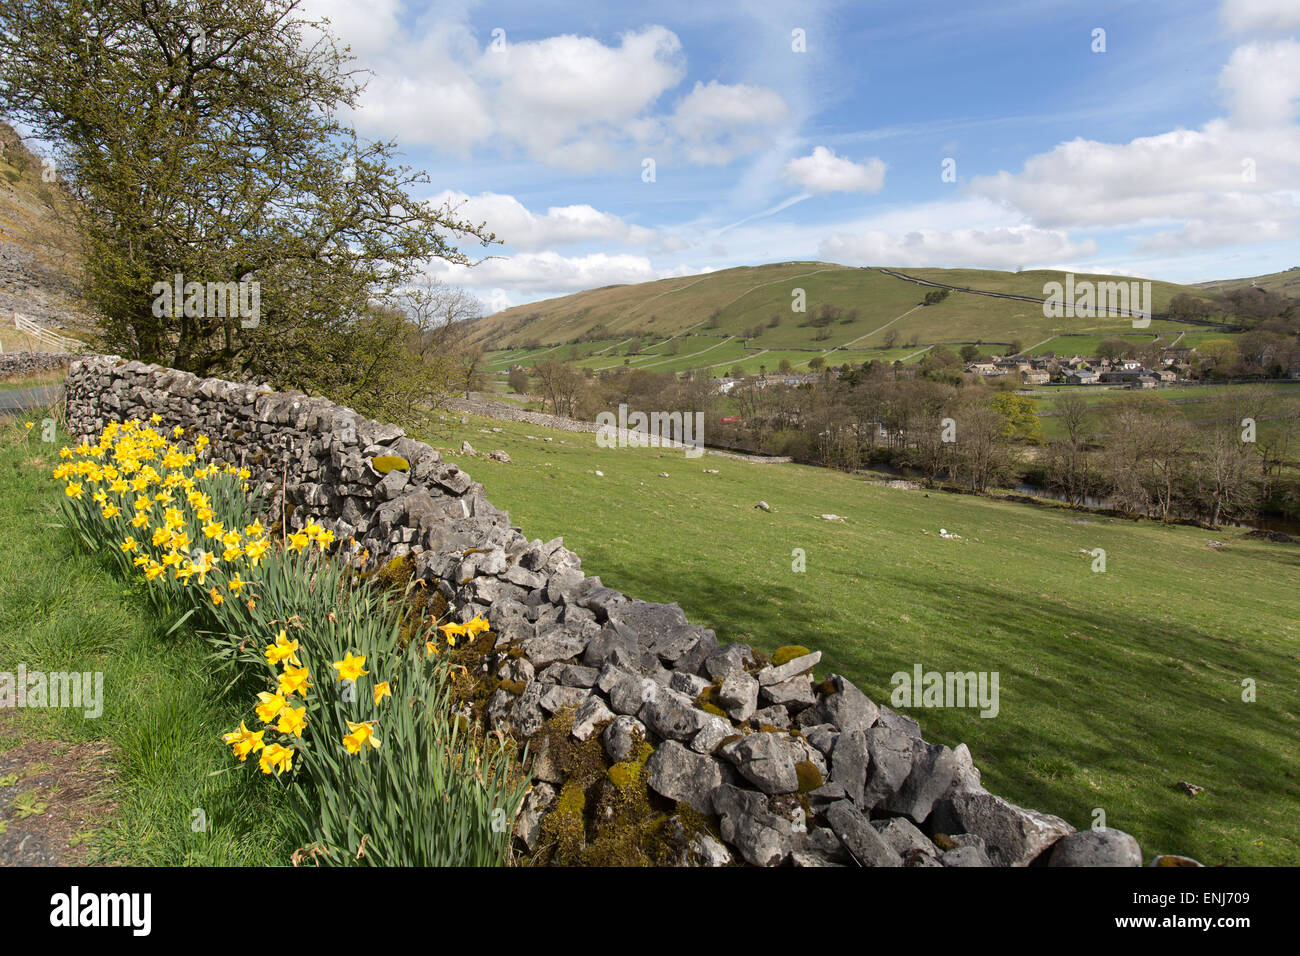 Village of Kettlewell, Yorkshire, England. Daffodils in full bloom with the village of Kettlewell in the background. Stock Photo